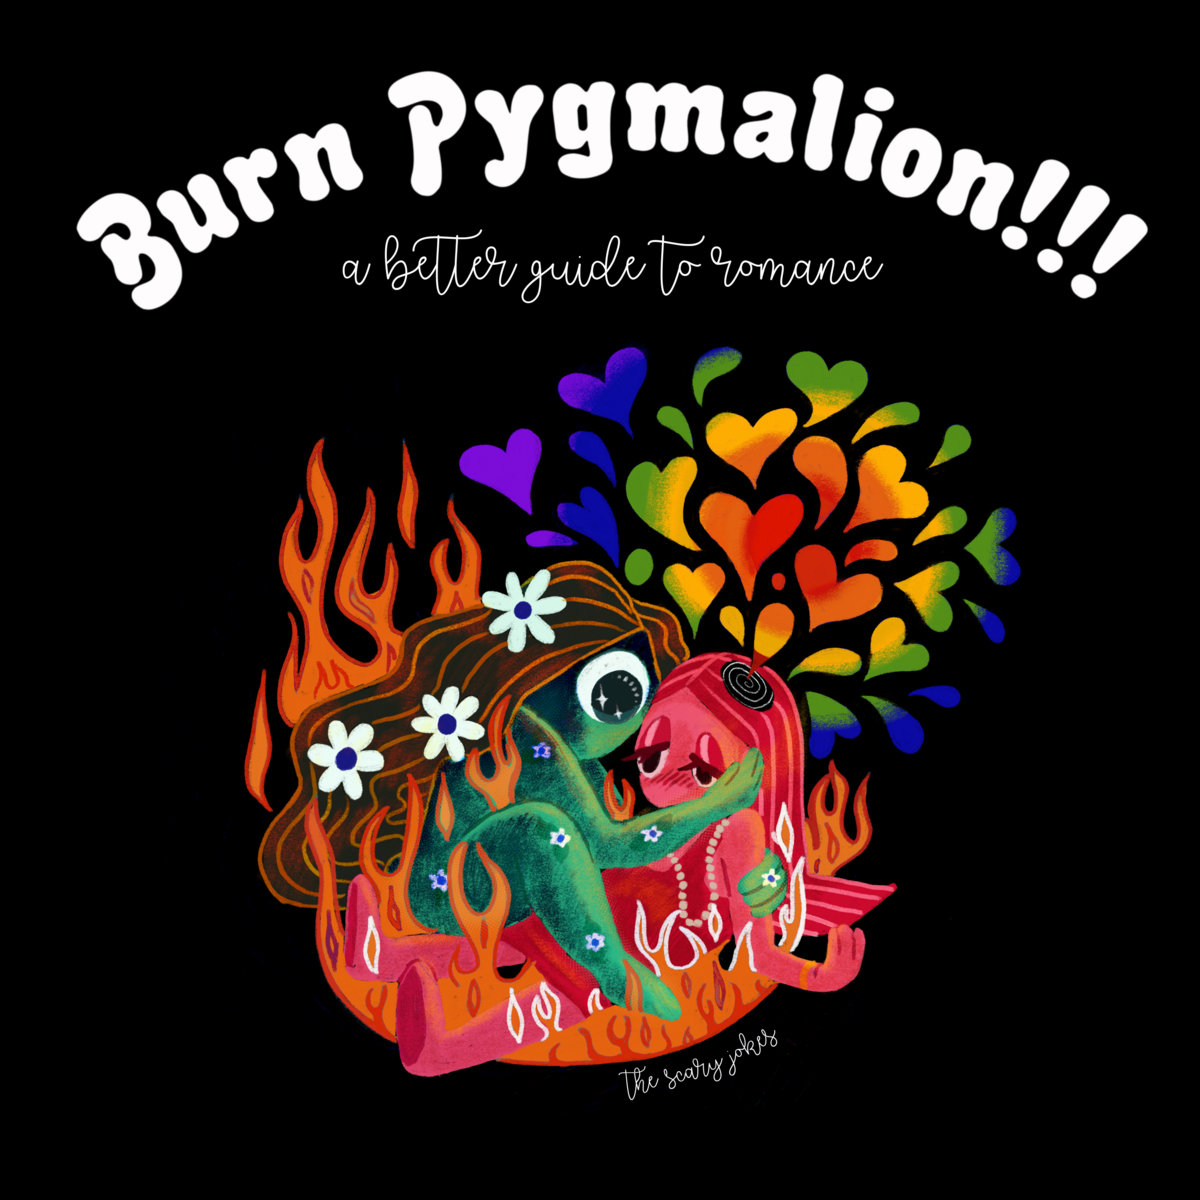 The album cover for BURN PYGMALION!!! A Better Guide to Romance by The Scary Jokes